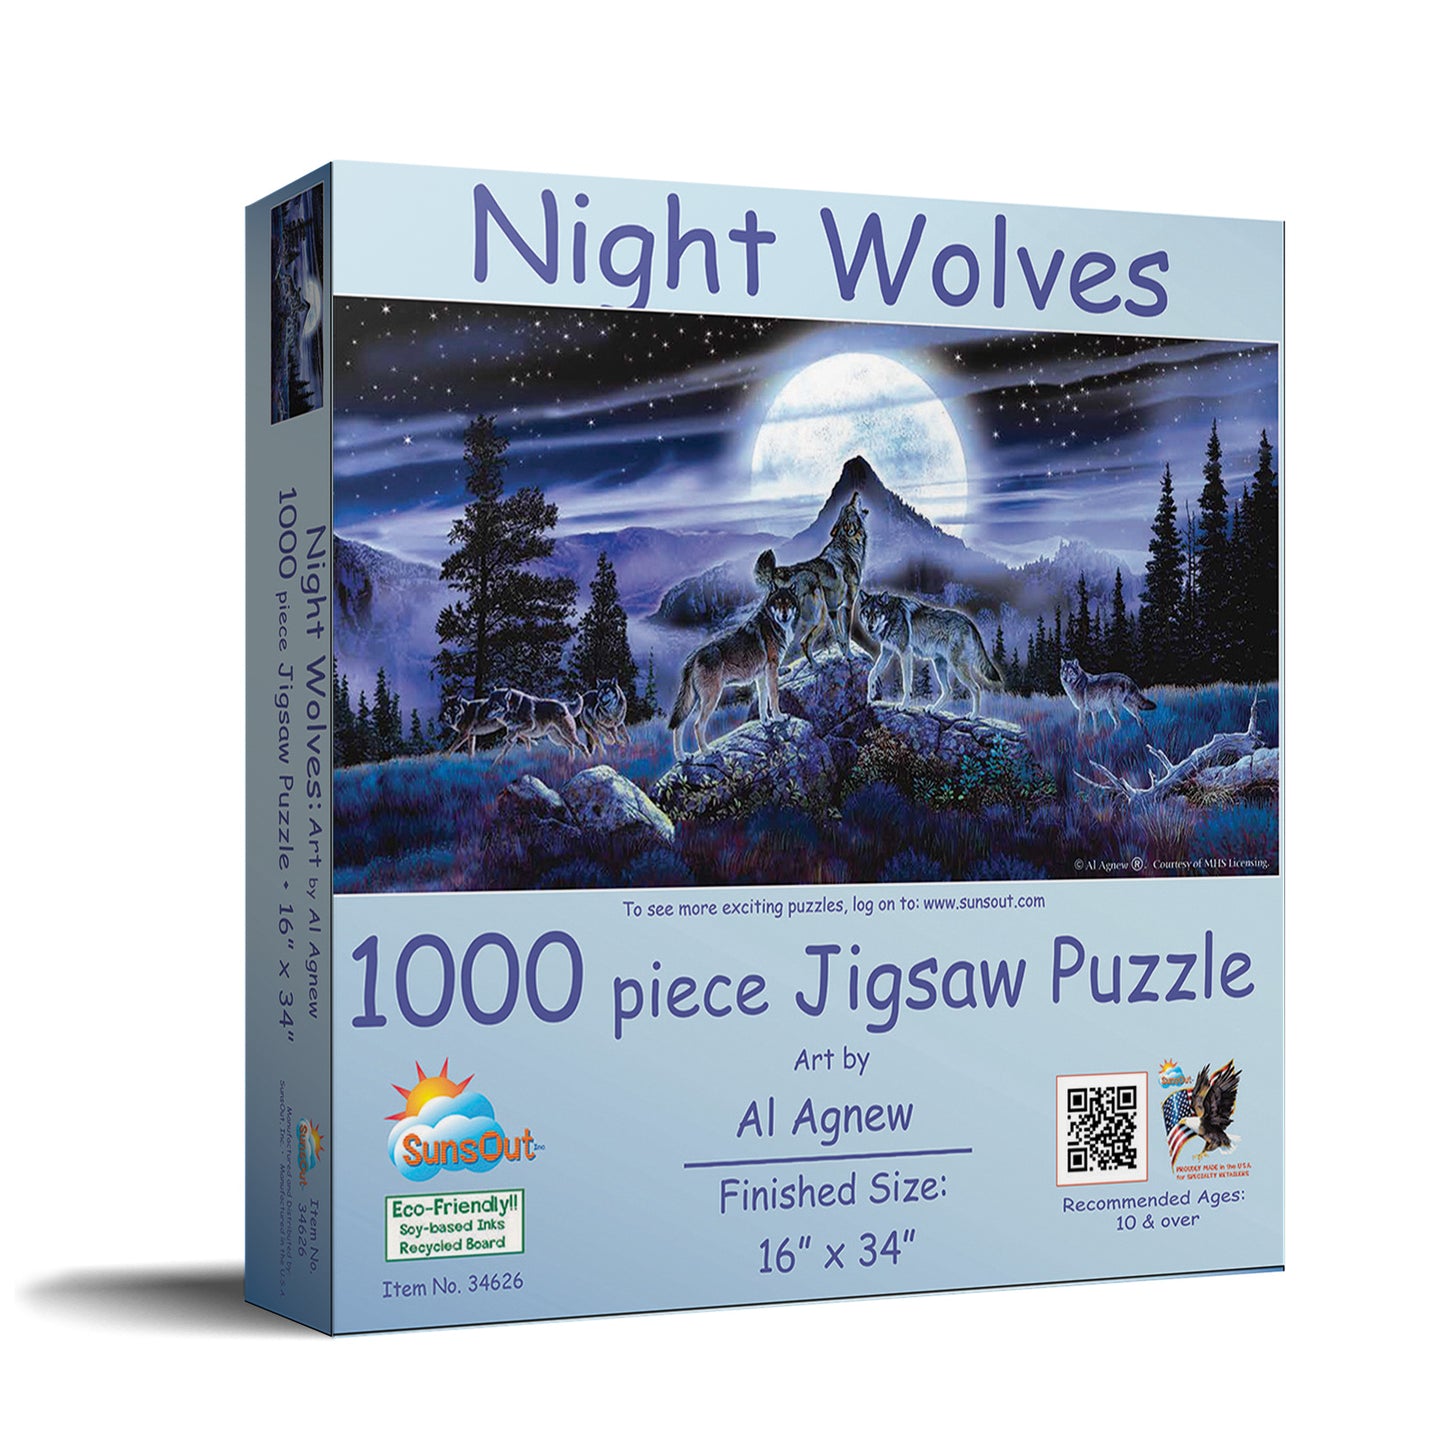 Night Wolves - 1000 Piece Jigsaw Puzzle